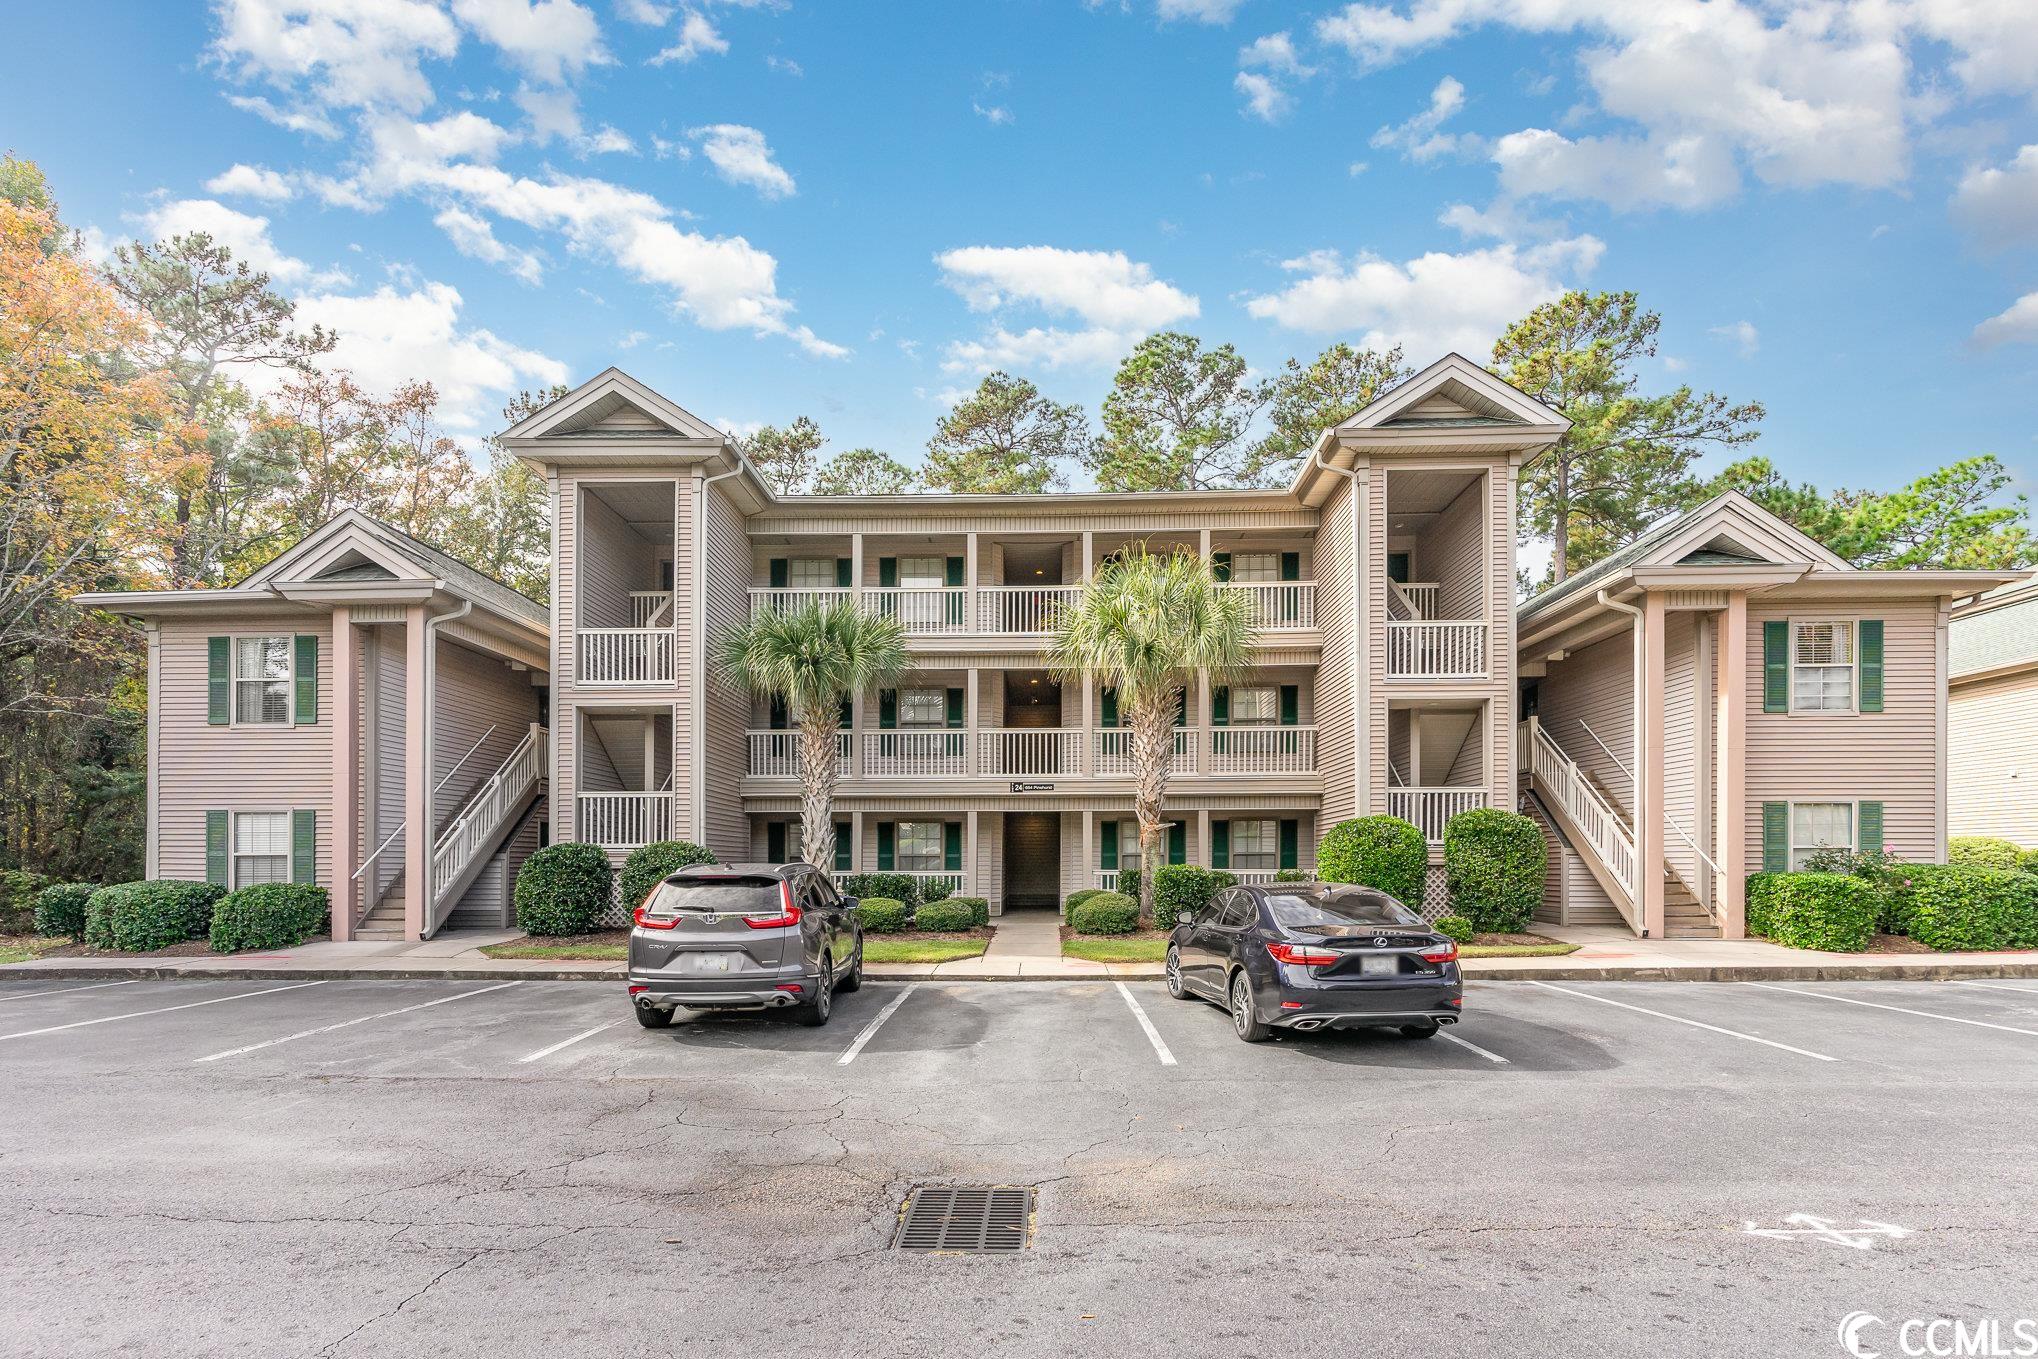 discover this stunning first-floor condo featuring 3 bedrooms and 2 baths. enjoy picturesque golf course views and a breathtaking panorama of the pond. whether you're an investor or seeking your forever home, true blue is the perfect choice. situated in a prime area, it's close to shopping and all the beauty pawleys island has to offer